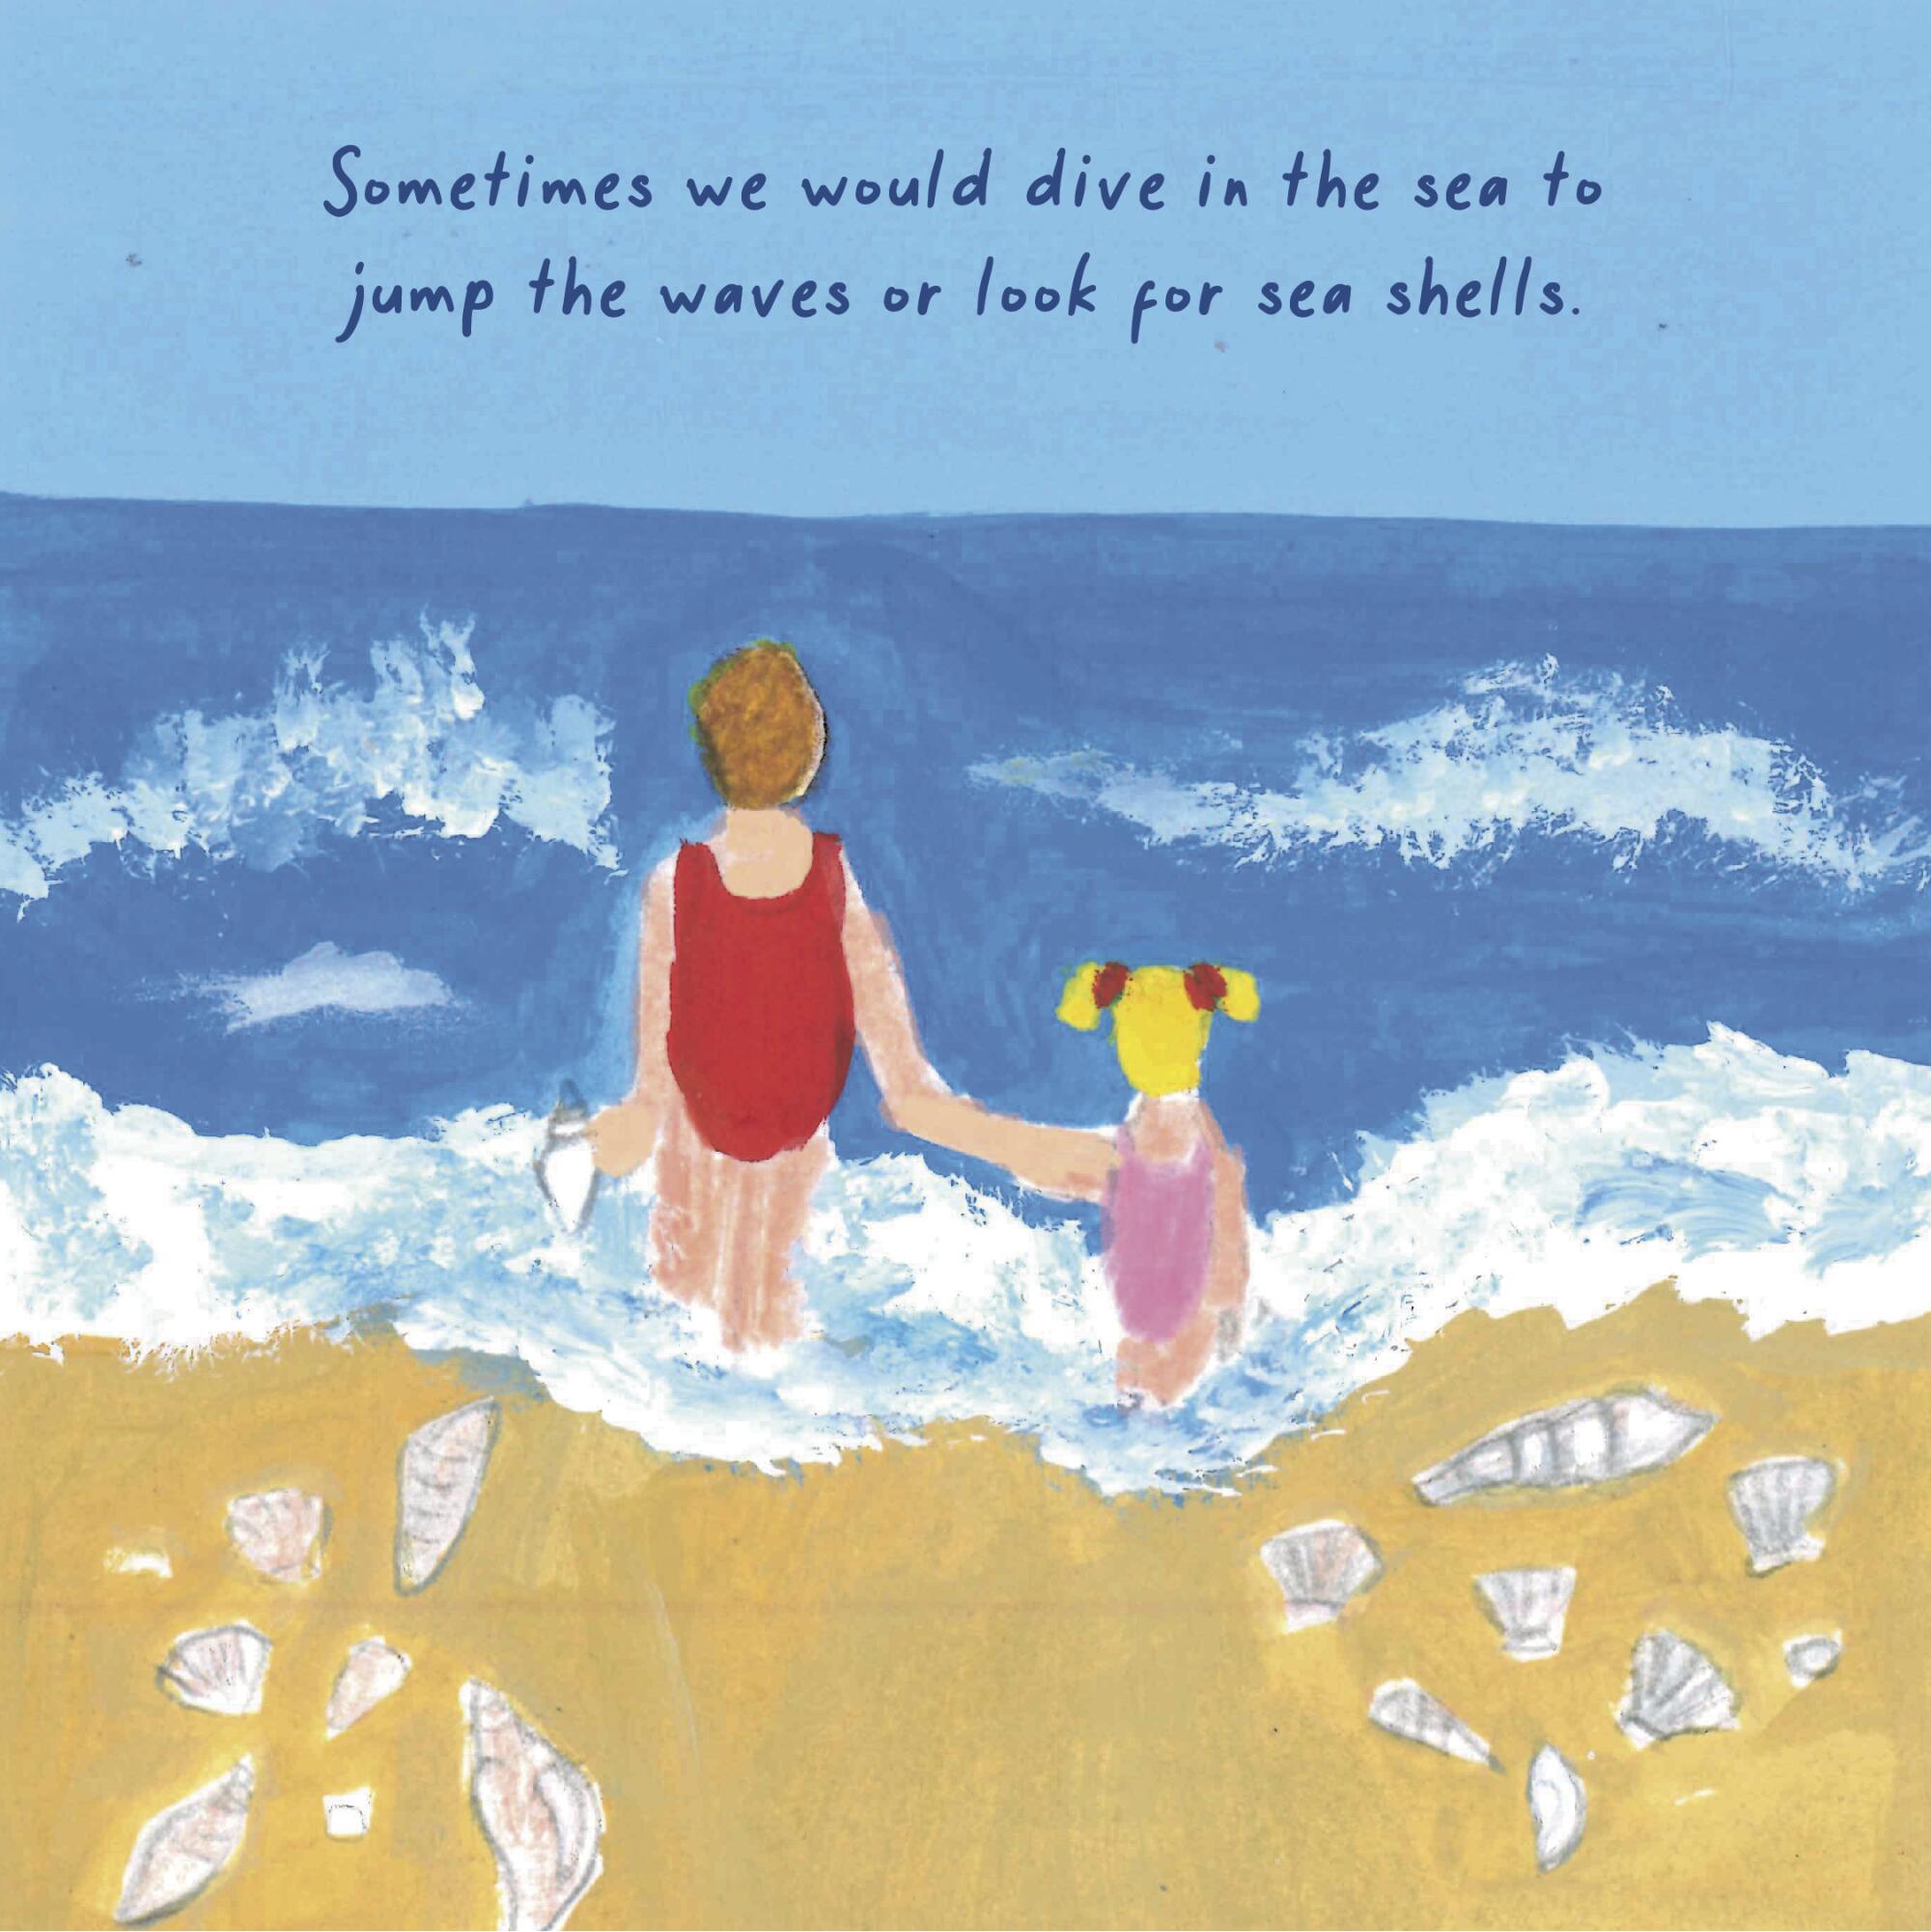 Sometimes we would dive in the sea to jump the waves or look for sea shells